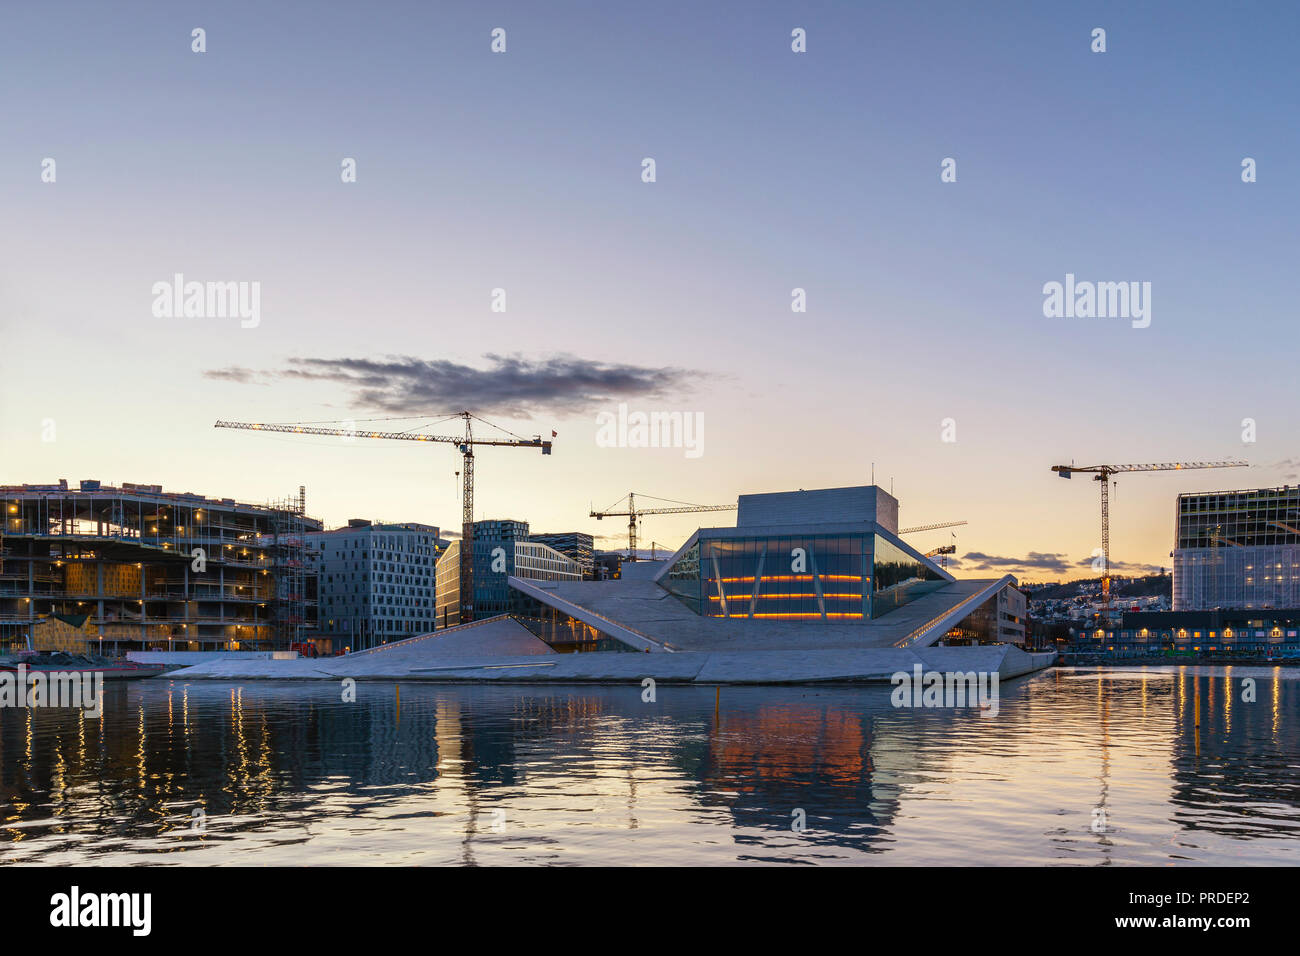 OSLO, NORWAY - APRIL 6, 2018: Oslo Norway, sunrise city skyline at business district and Oslo Opera Stock Photo